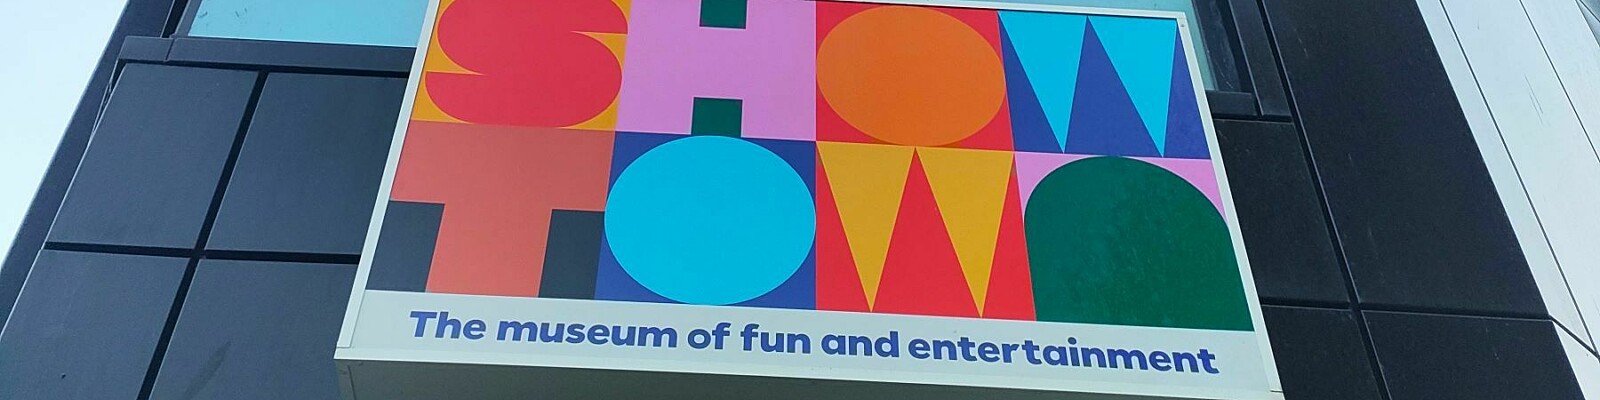 Image of the Showtown sign on the exterior of the museum, a black building with windows.